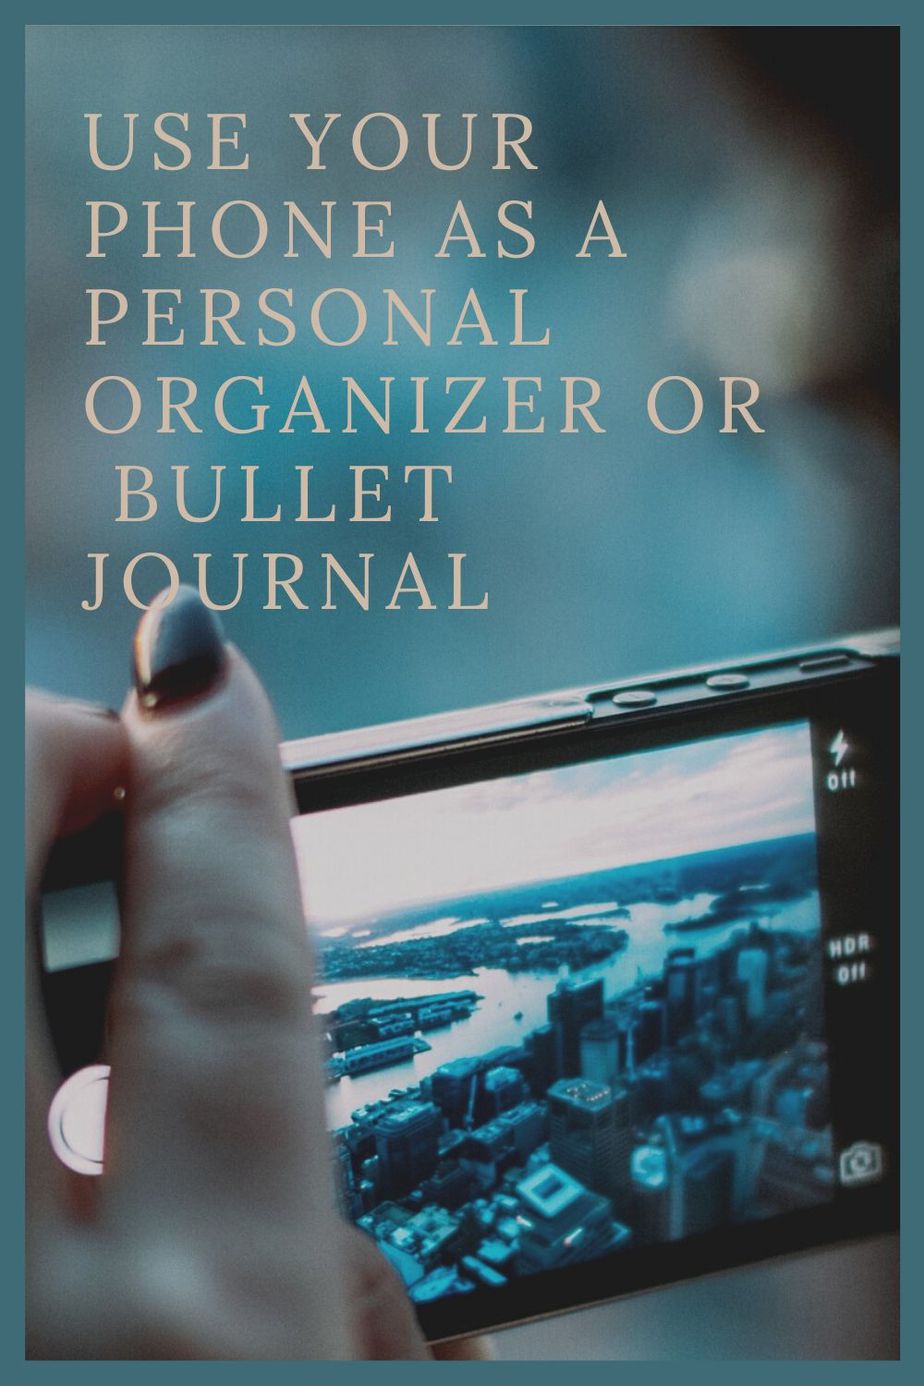 Use Your Phone as a Personal Organizer or Bullet Journal